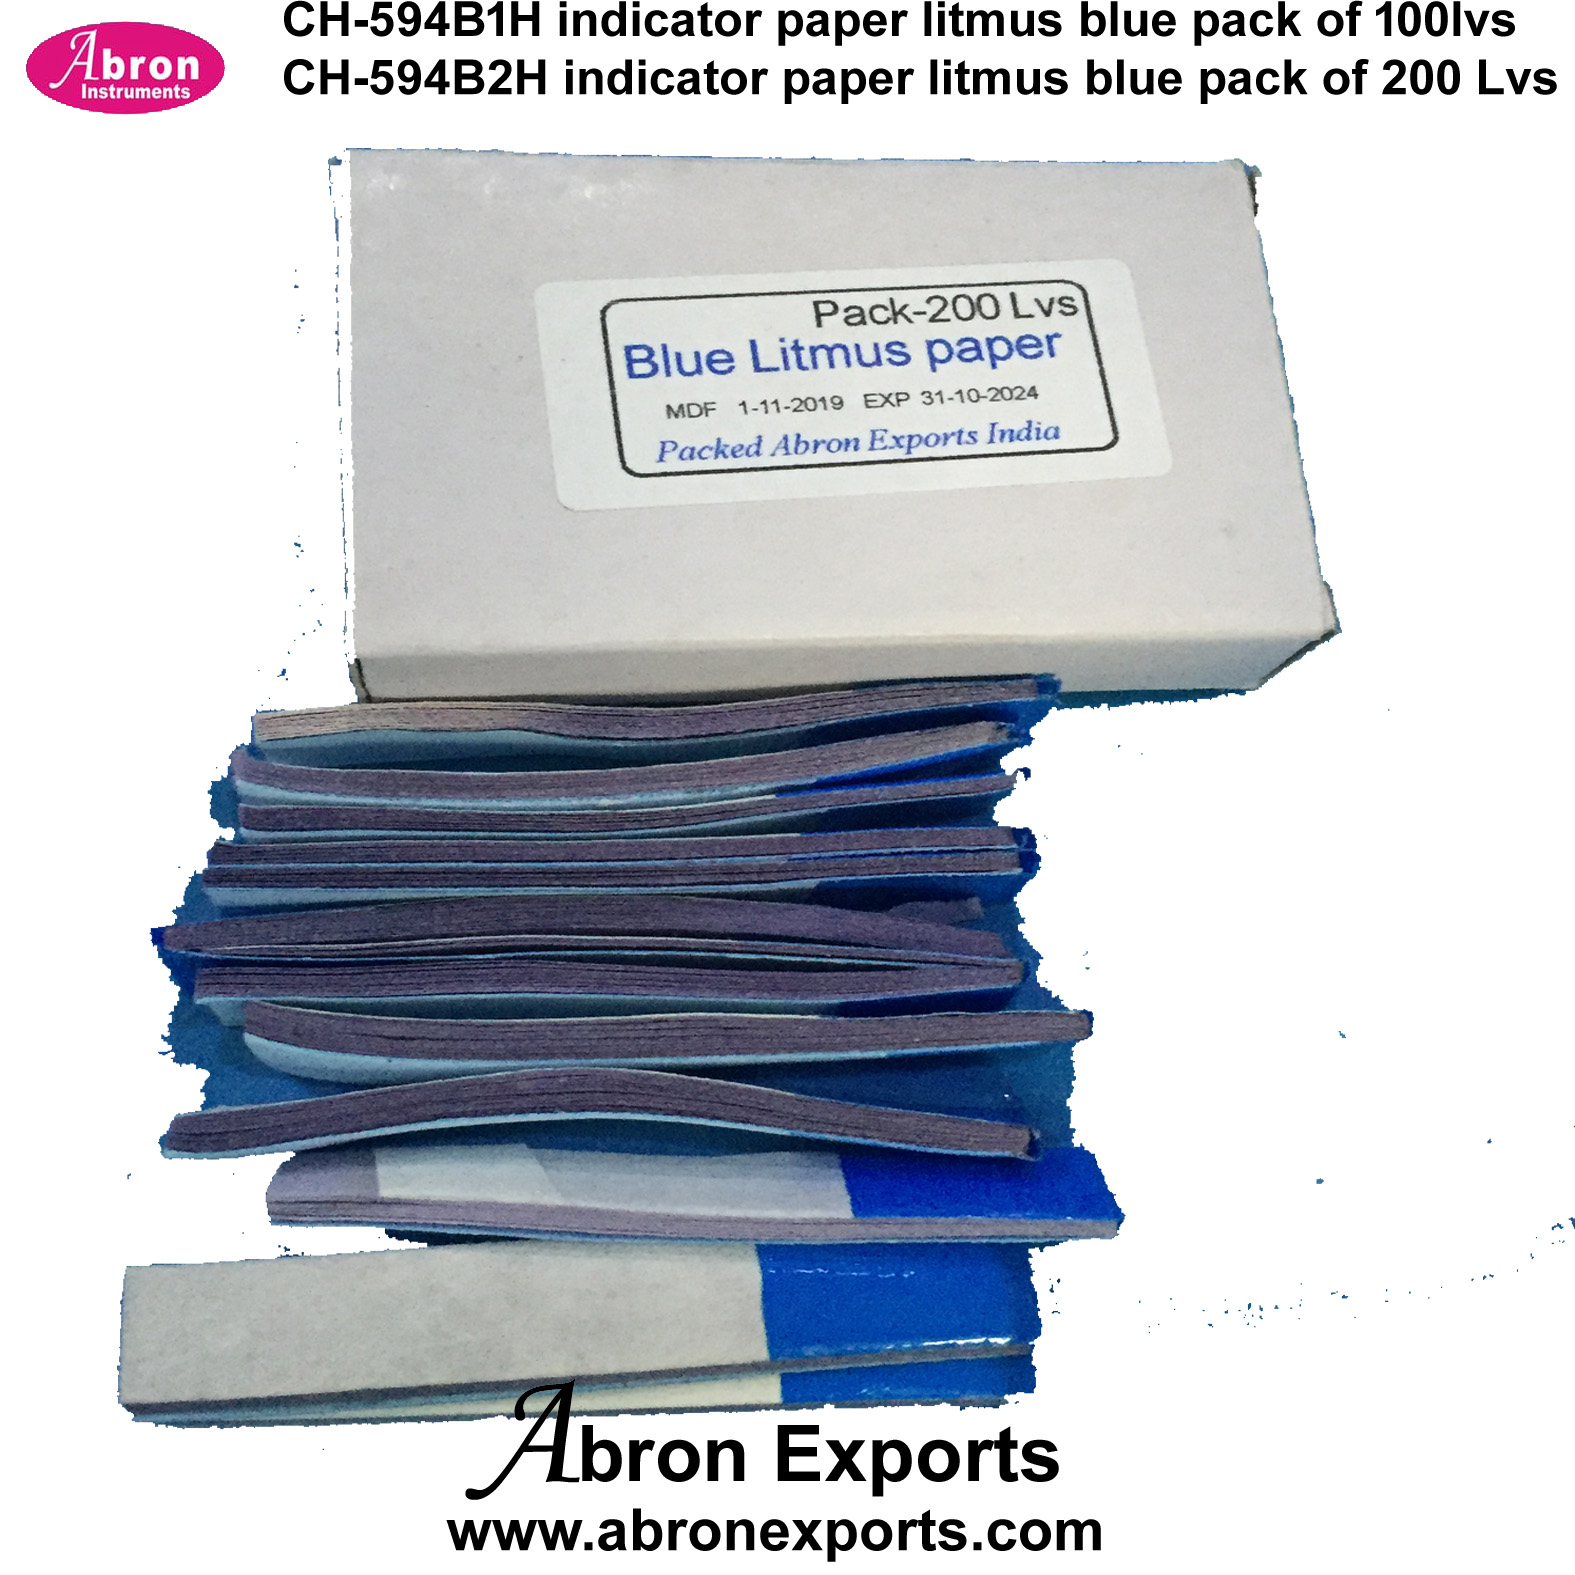 Litmus Blue Indicator Papers Blue to Red in Base Abron 100 Lvs Leaves Box of 10 Packs of 100 leaves CH-594B1H IP-1115  